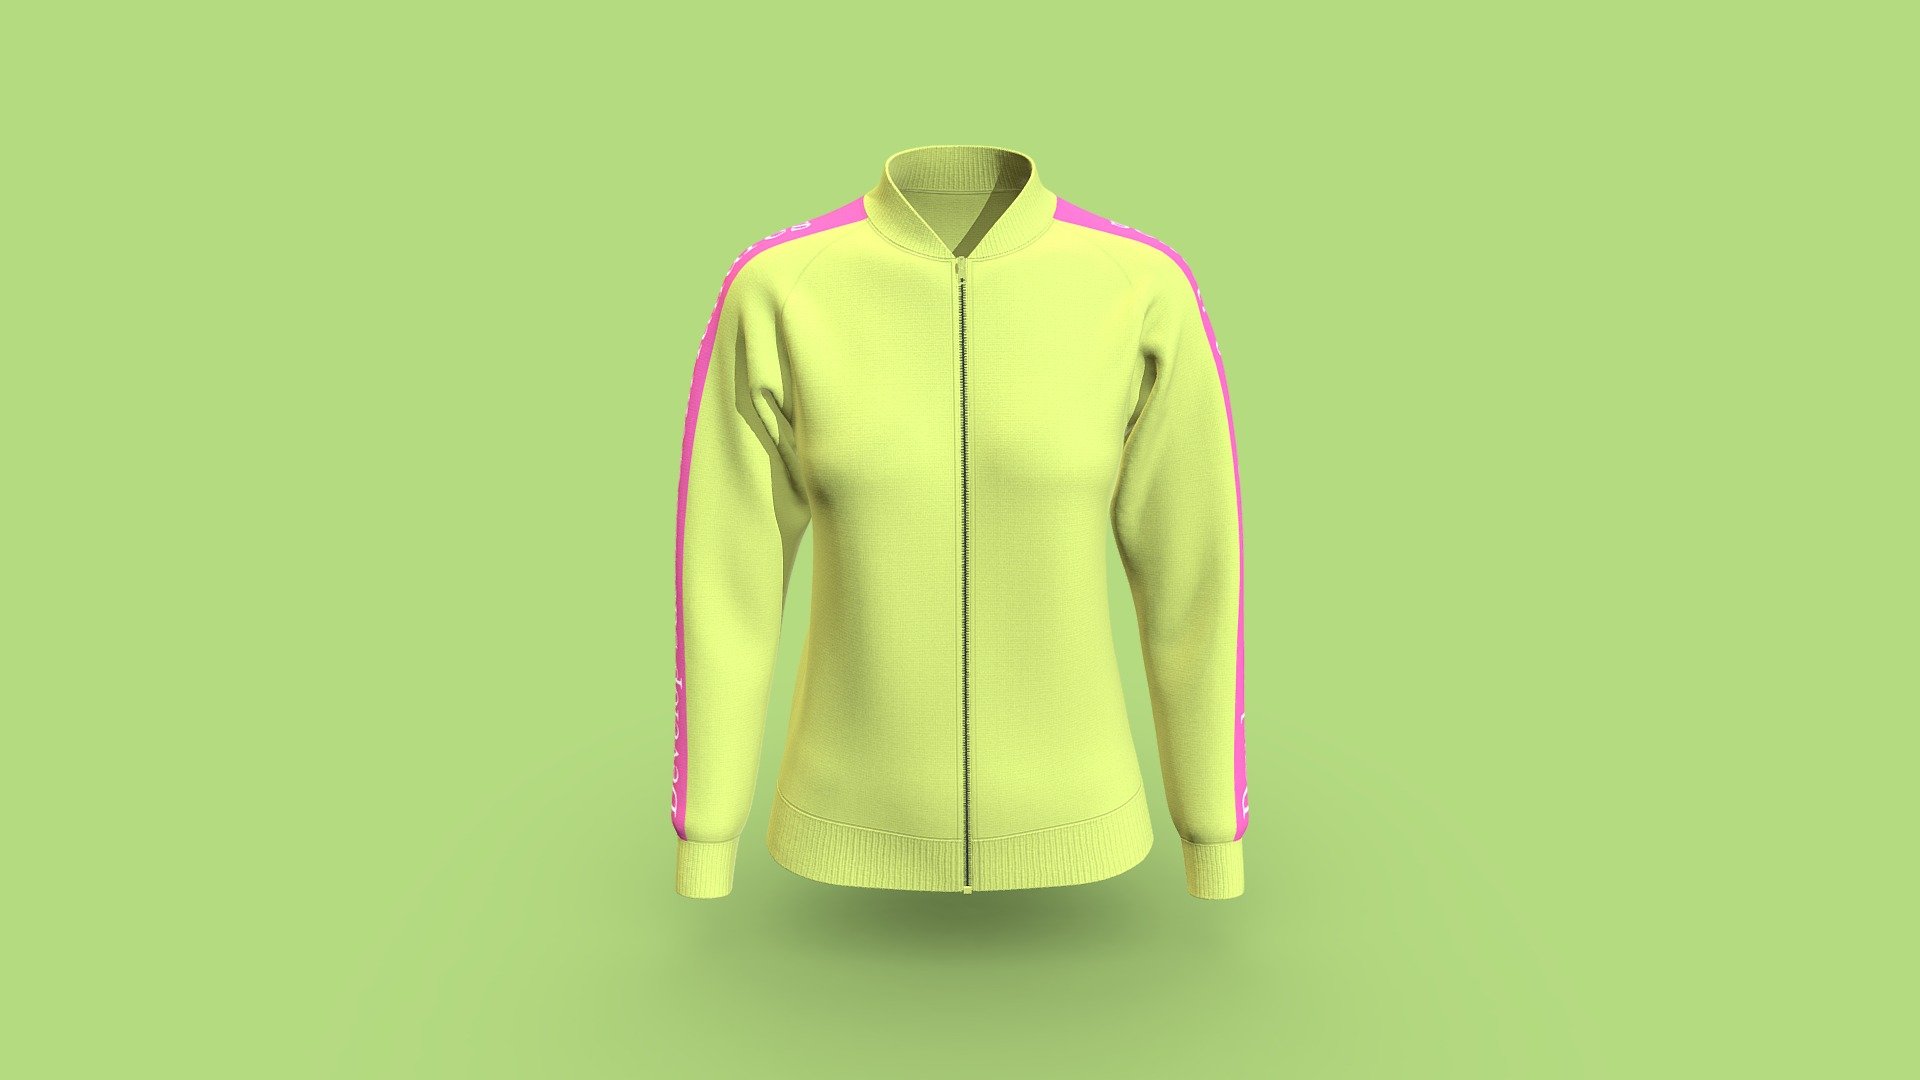 Cloth Title = Raglan Fashion Casual Slim Jacket Motive 

SKU = DG100086 

Category = Women 

Product Type = Jacket 

Cloth Length = Regular 

Body Fit = Slim Fit 

Occasion = Outerwear 

Sleeve Style = Raglan Sleeve 


Our Services:

3D Apparel Design.

OBJ,FBX,GLTF Making with High/Low Poly.

Fabric Digitalization.

Mockup making.

3D Teck Pack.

Pattern Making.

2D Illustration.

Cloth Animation and 360 Spin Video.


Contact us:- 

Email: info@digitalfashionwear.com 

Website: https://digitalfashionwear.com 


We designed all the types of cloth specially focused on product visualization, e-commerce, fitting, and production. 

We will design: 

T-shirts 

Polo shirts 

Hoodies 

Sweatshirt 

Jackets 

Shirts 

TankTops 

Trousers 

Bras 

Underwear 

Blazer 

Aprons 

Leggings 

and All Fashion items. 





Our goal is to make sure what we provide you, meets your demand 3d model